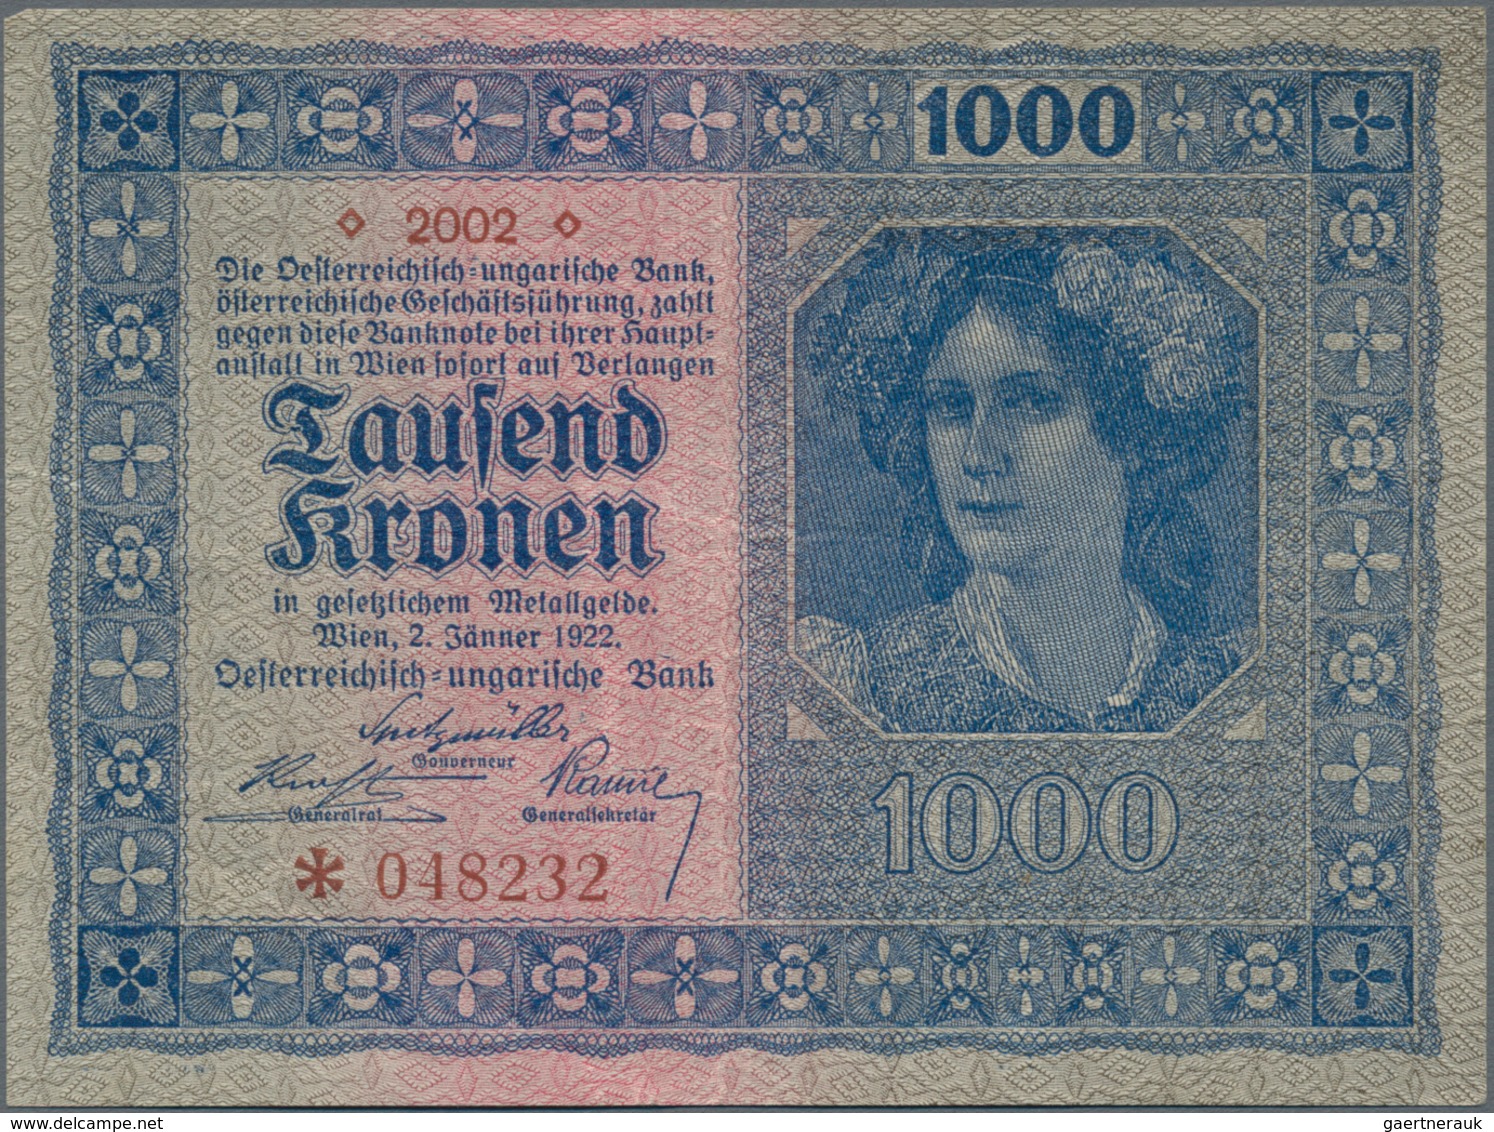 Alle Welt: Collectors album with 309 banknotes, advertising notes and bonds, comprising for example